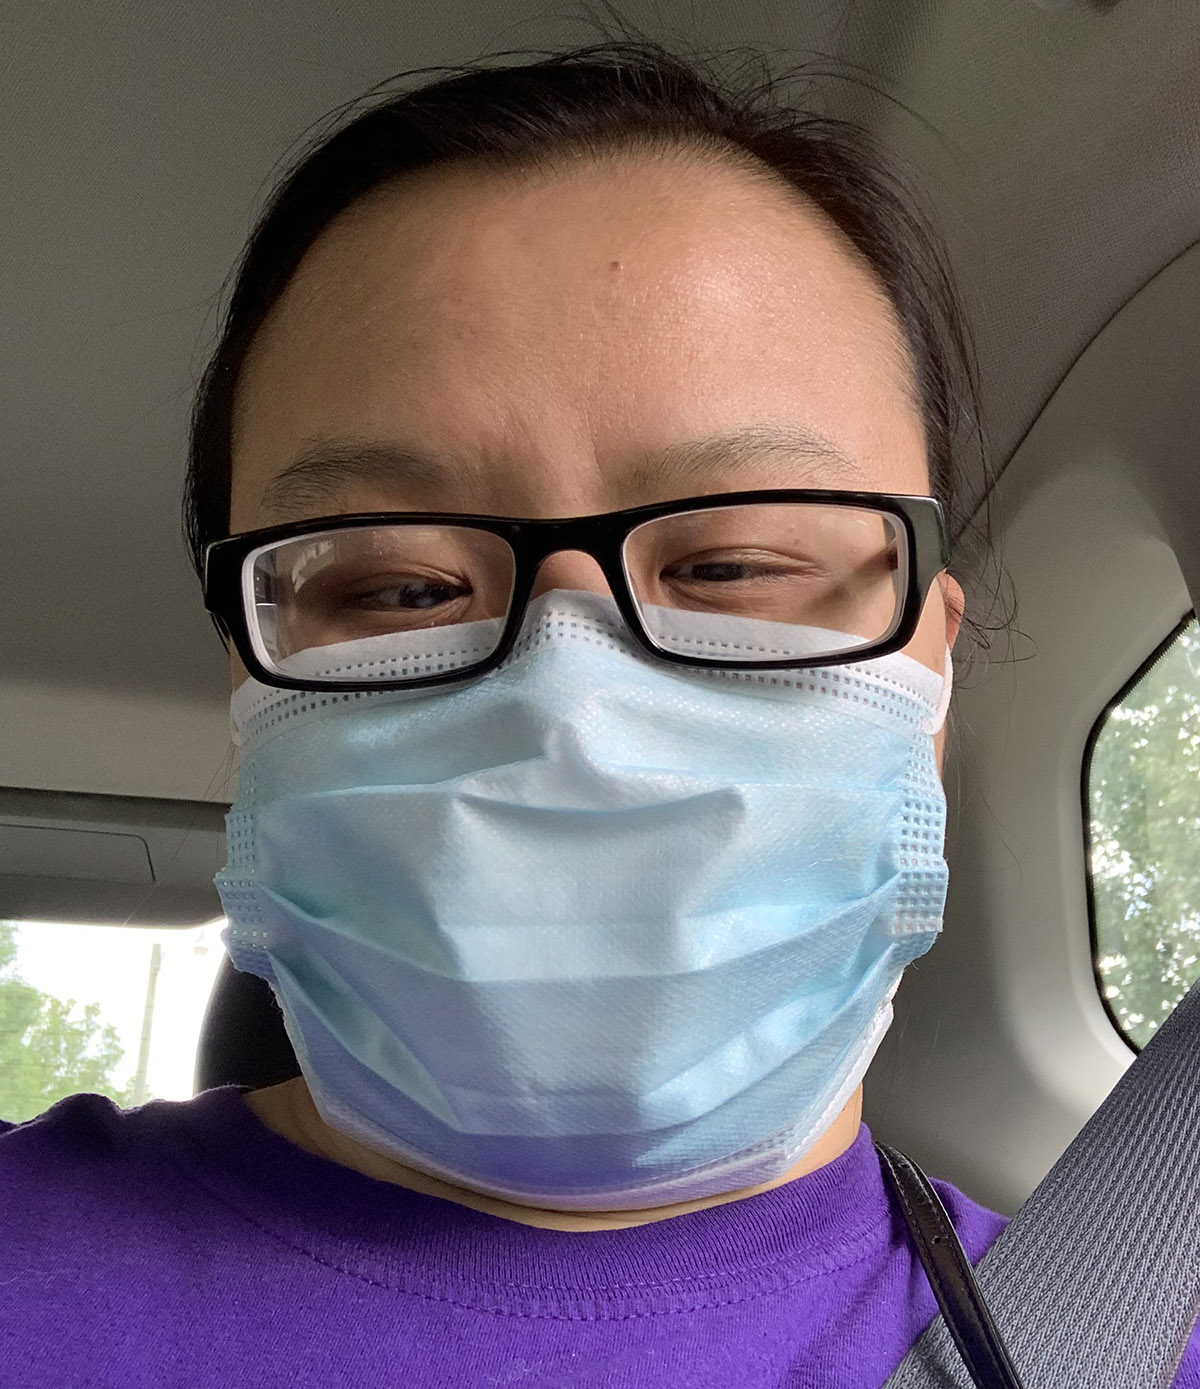 An Asian woman wears glasses and a mask as a passenger in a car.